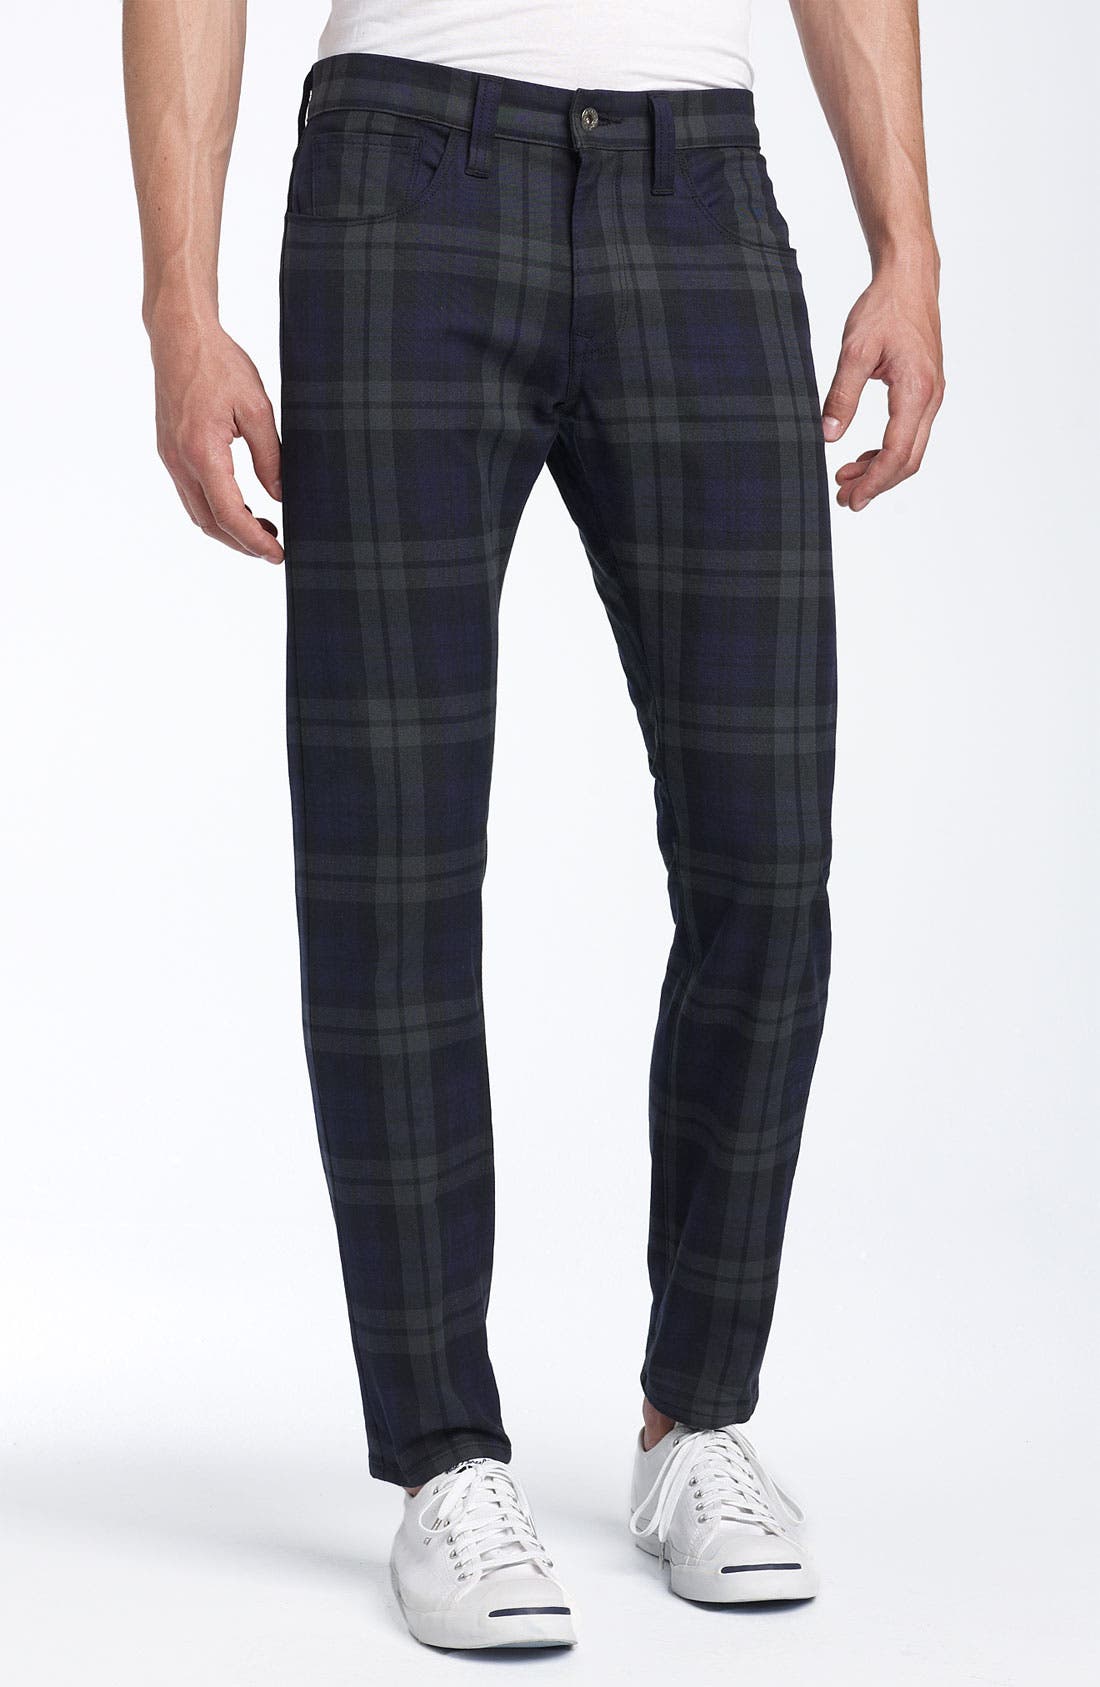 levi's checkered jeans